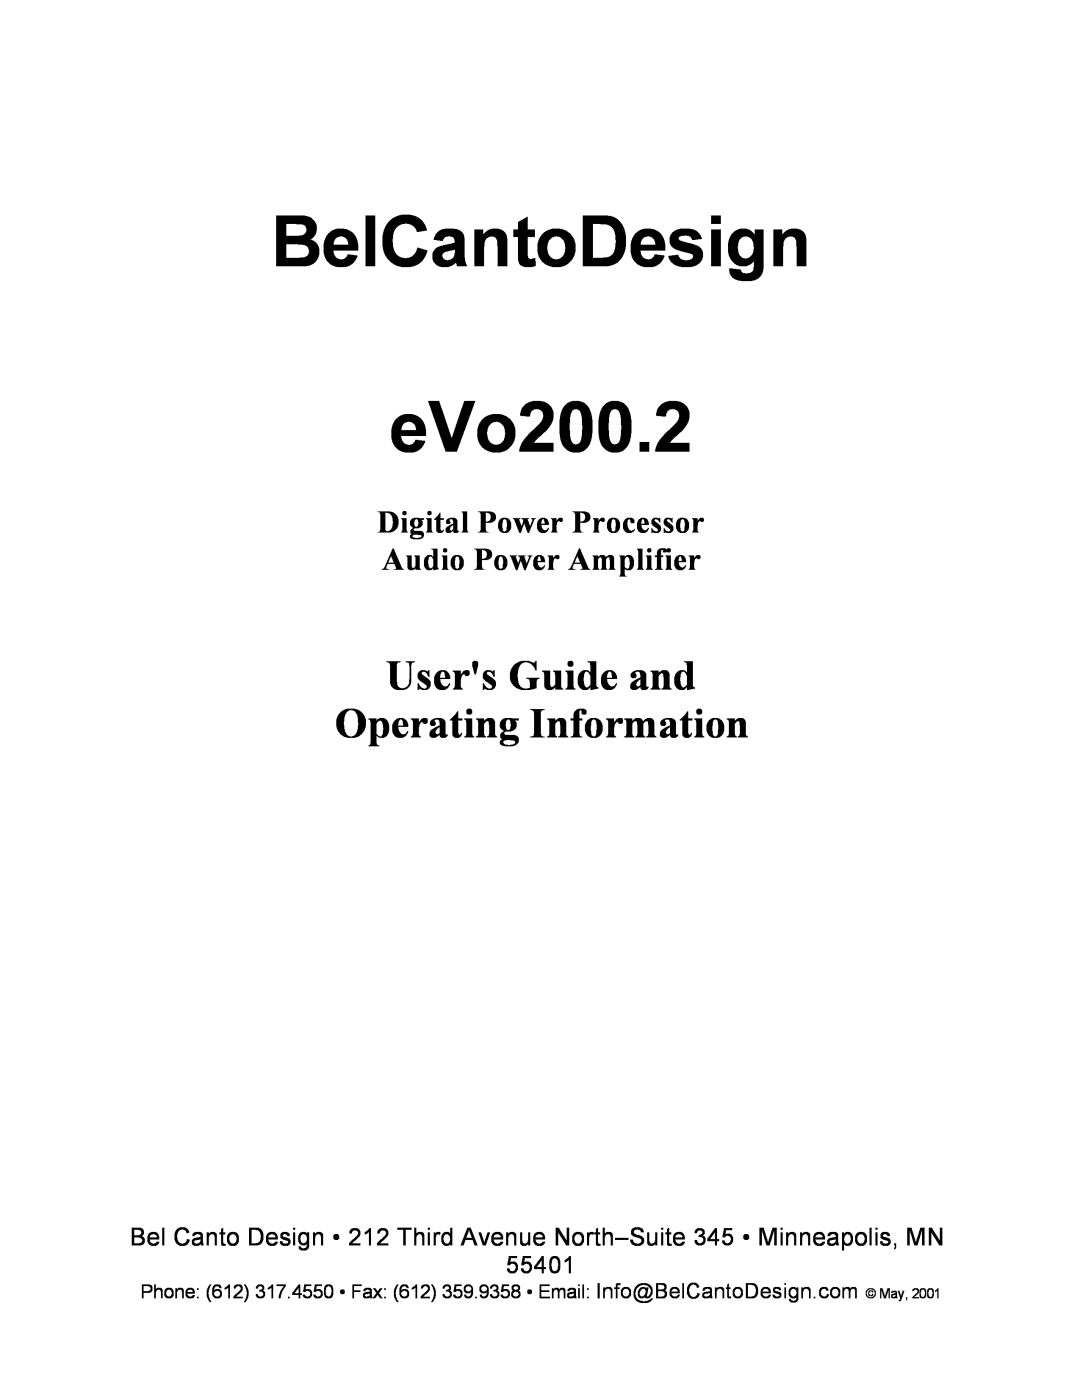 Bel Canto Design manual 55401, BelCantoDesign eVo200.2, Users Guide and Operating Information 